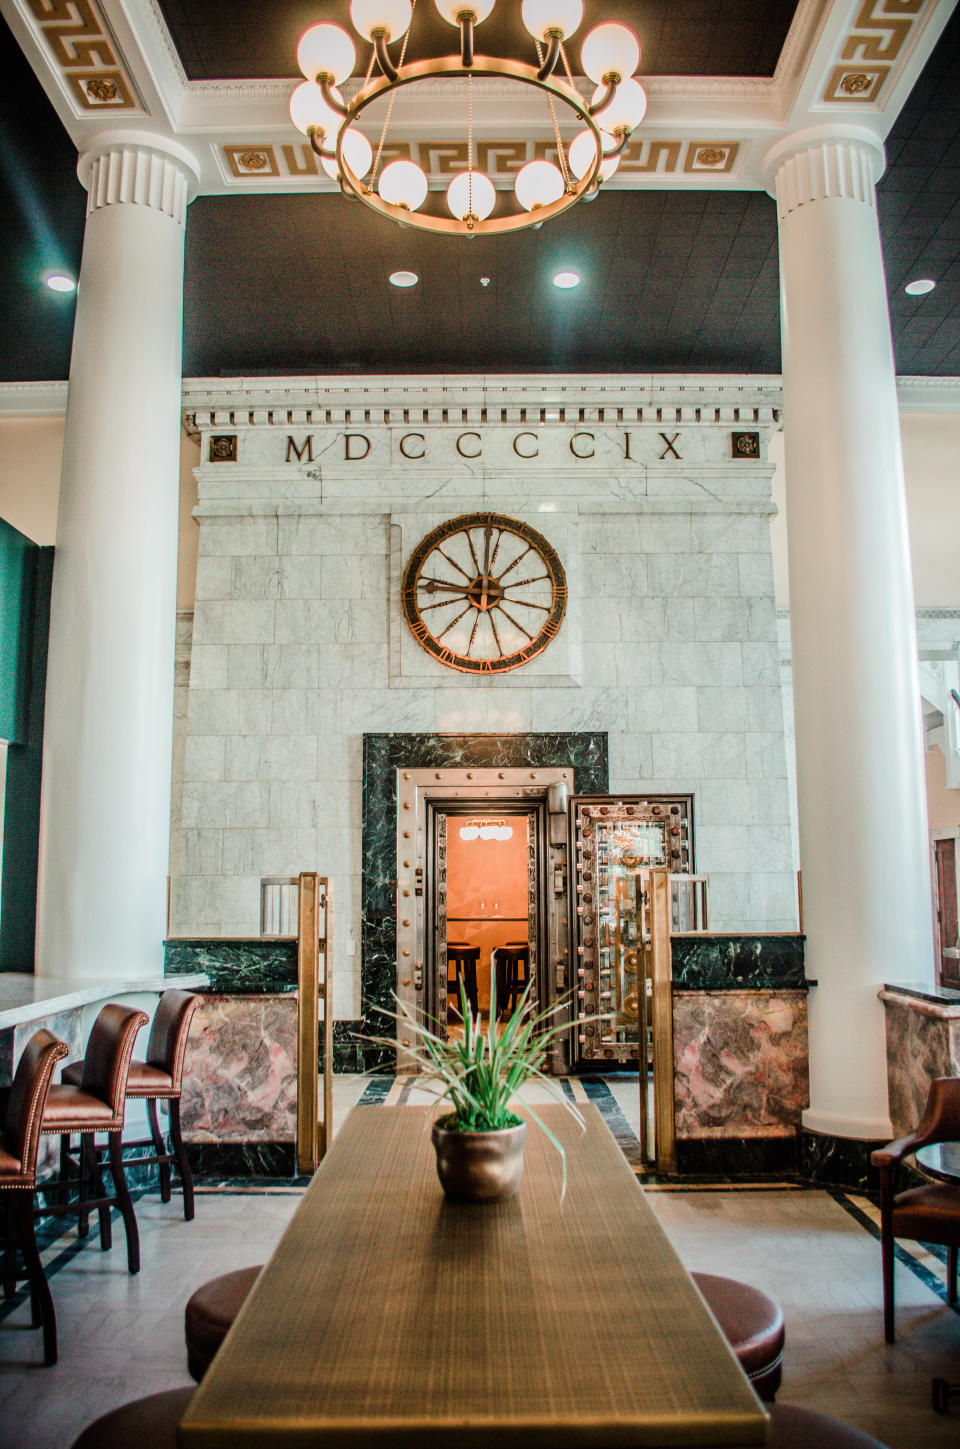 The Vault restaurant in Roanoke's Liberty Trust Hotel is resplendent with soaring ceilings, marble columns and a popular high-end wine tasting room located inside one of the bank’s elaborate Beaux Arts vaults.